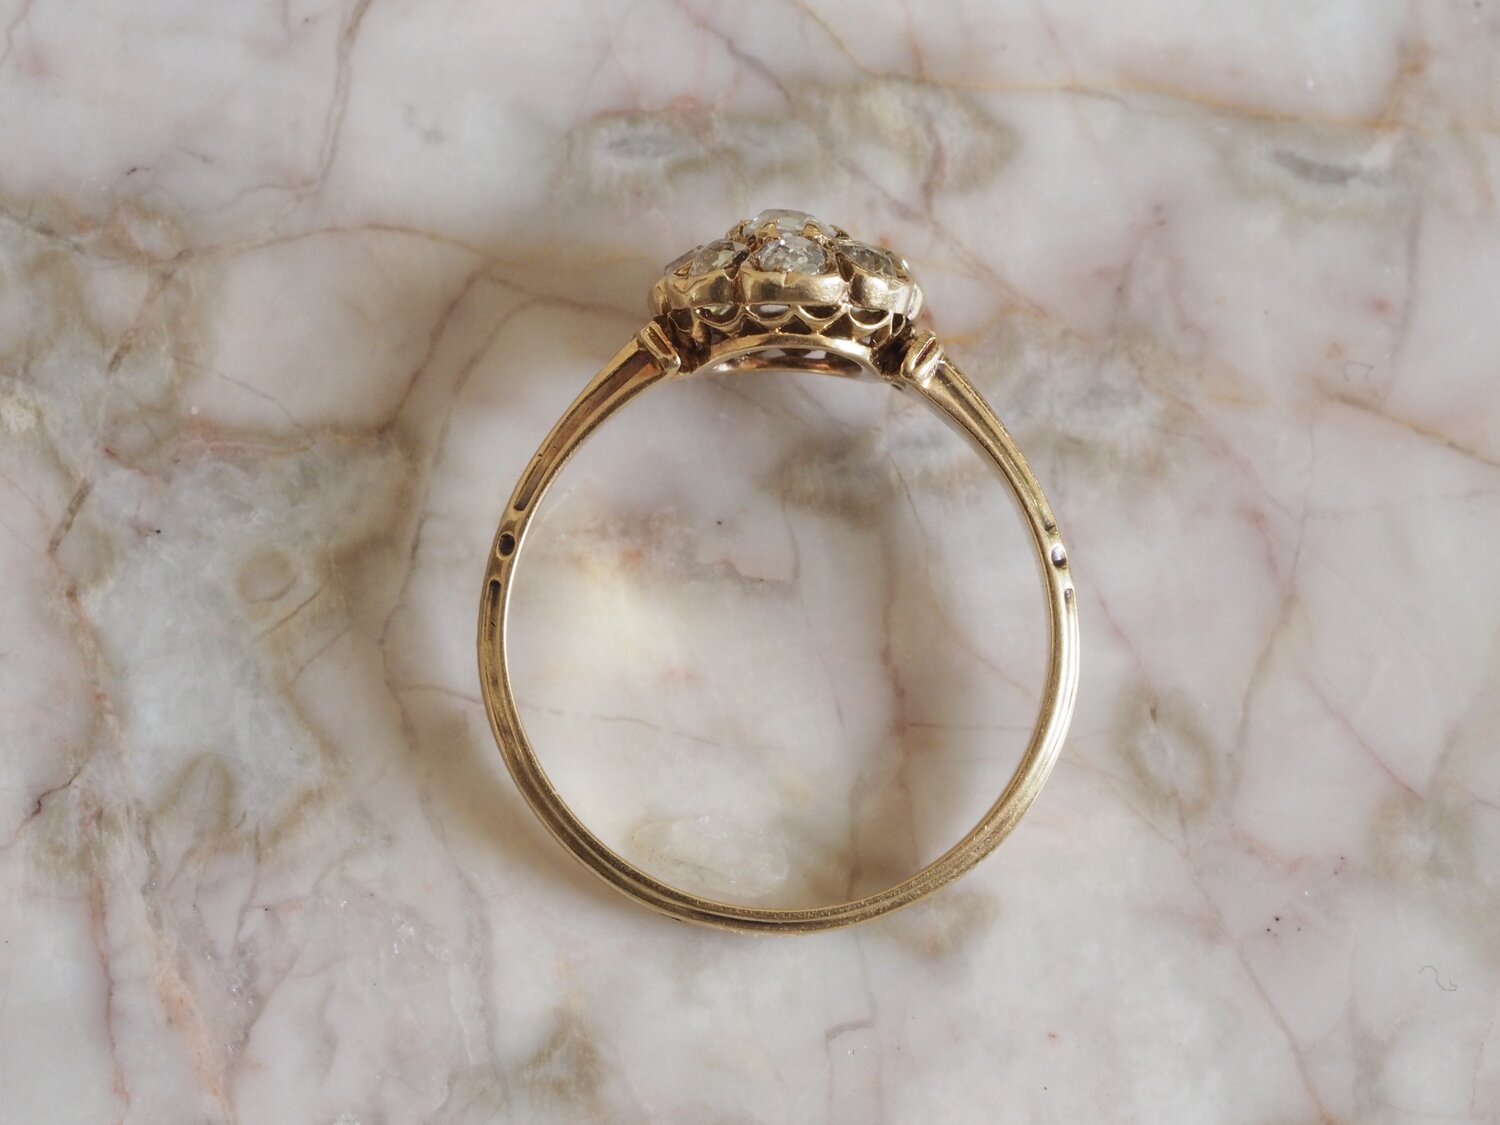 Antique Victorian French 18k Gold Old European Cut Diamond Ring